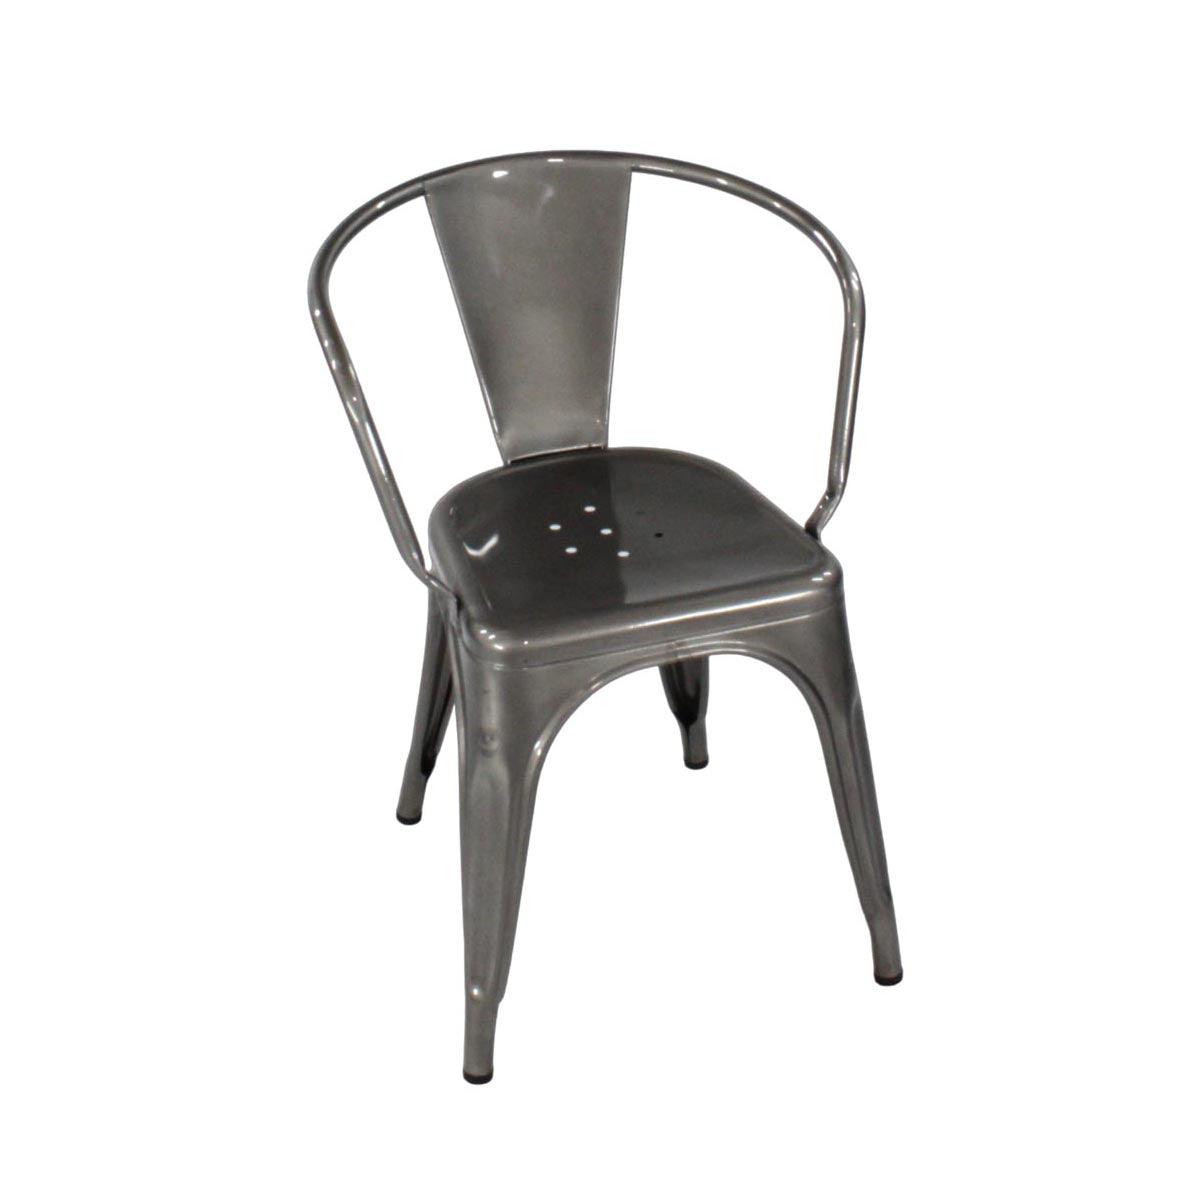 Tolix: Chaise A Cafe Chair in Gunmetal Grey - Refurbished